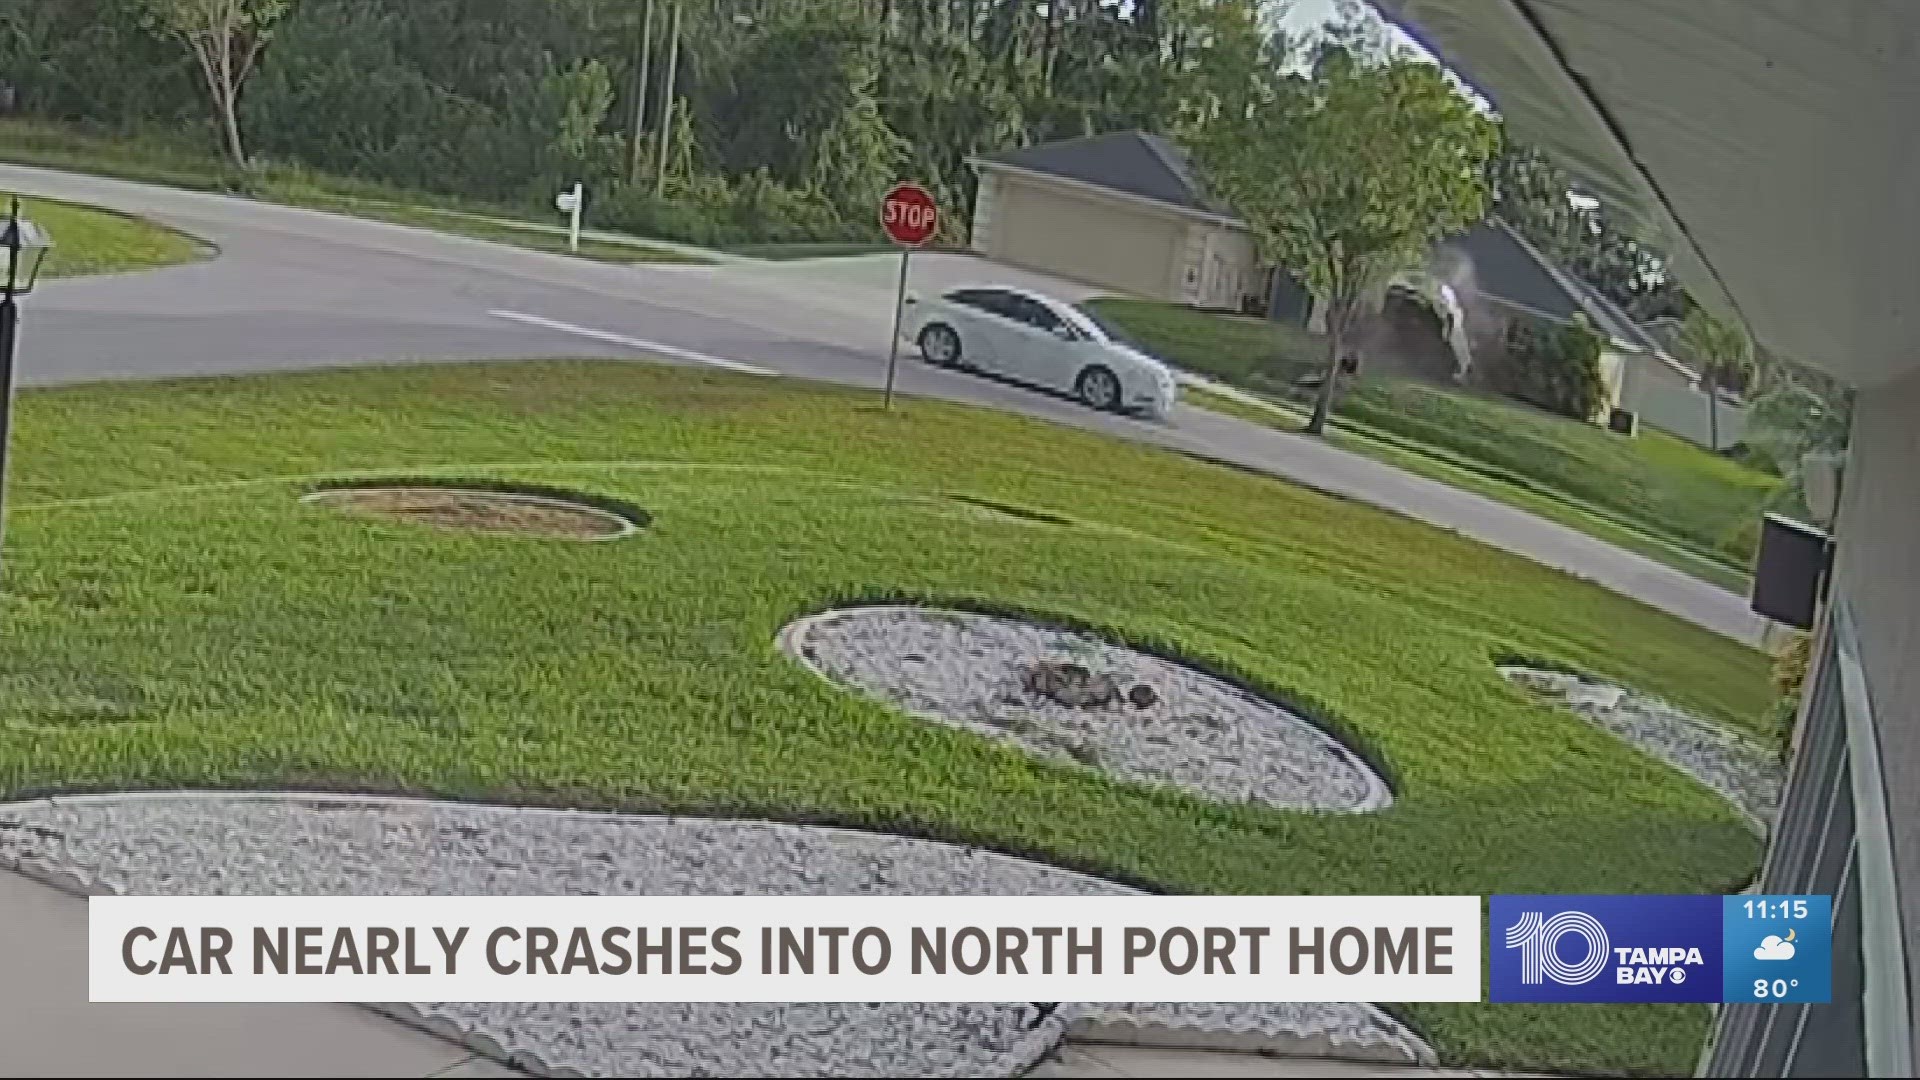 It happened while the homeowner was filming and has since gone viral on TikTok.